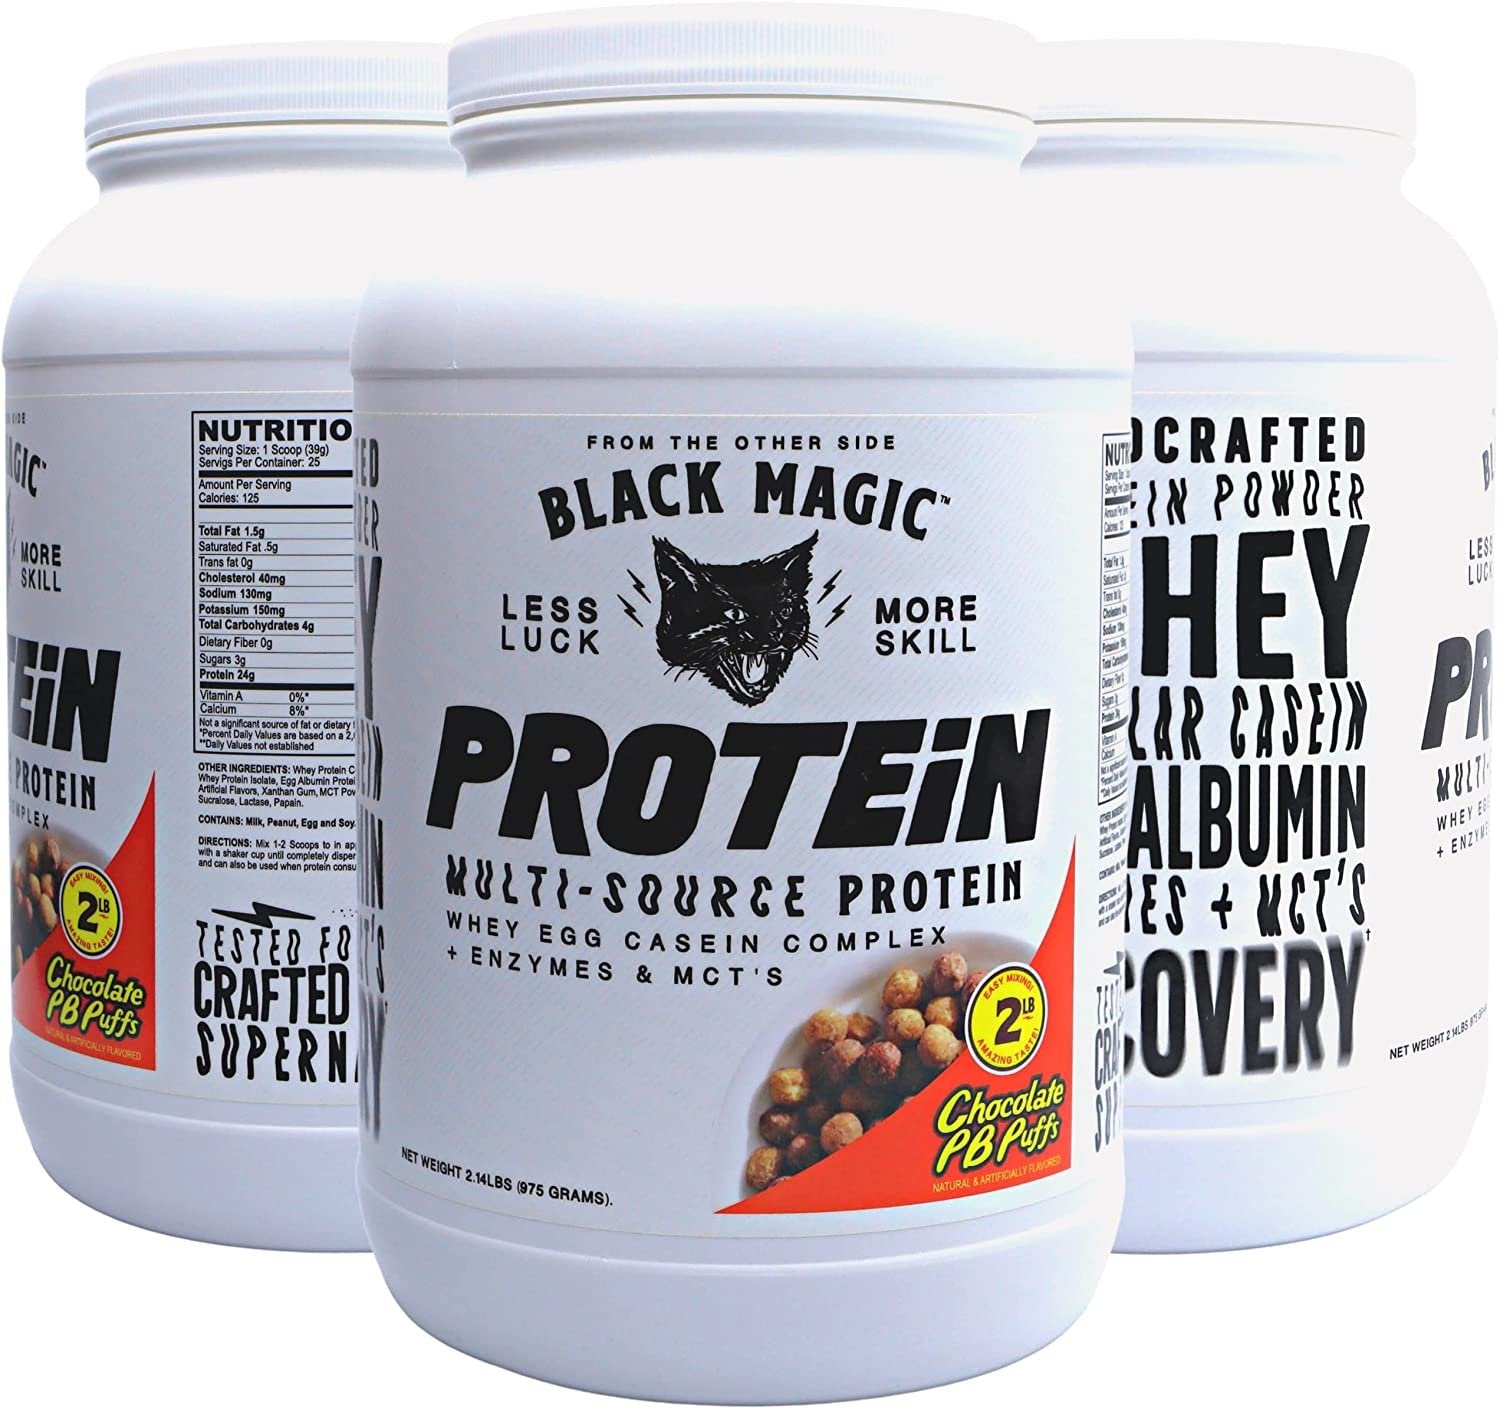 Chocolate Puff Black Magic Multi-Source Protein - Whey, Egg, and Casein Complex with Enzymes & MCT Powder - Pre Workout and Post Workout - 24g Protein - 2 LB with Bonus Key Chain